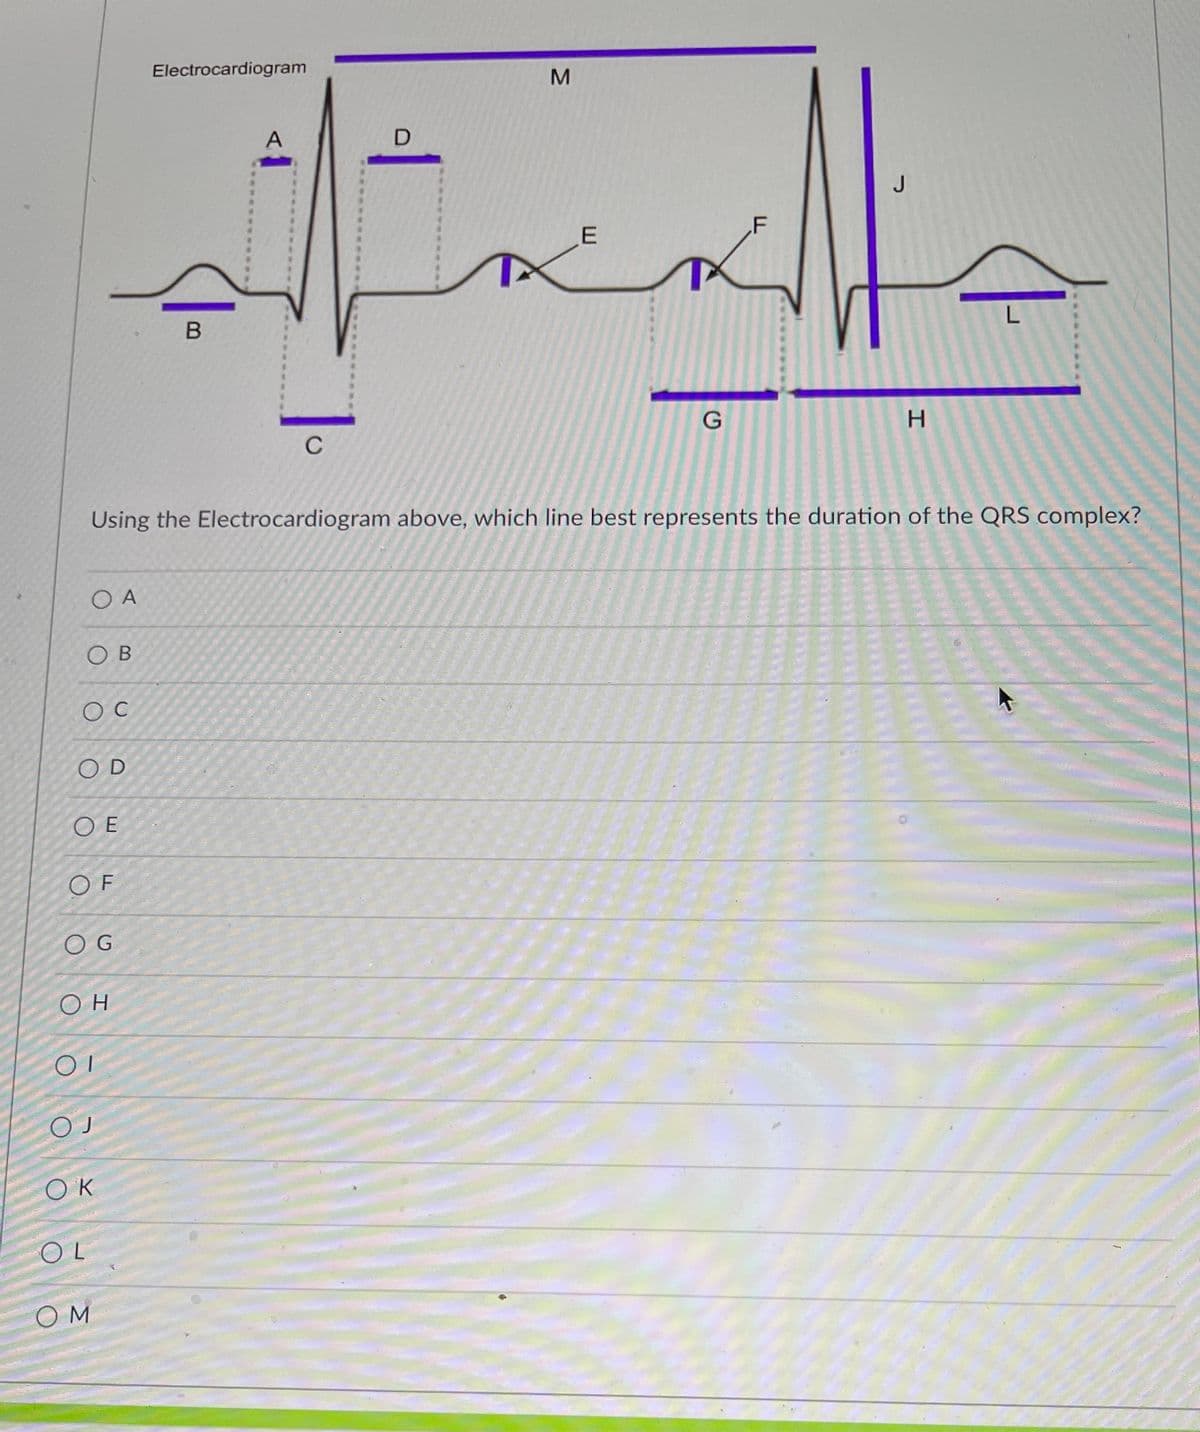 Electrocardiogram
D
J
.F
C
H.
Using the Electrocardiogram above, which line best represents the duration of the QRS complex?
O A
OB
OD
O E
OF
O G
OK
OL
O M
